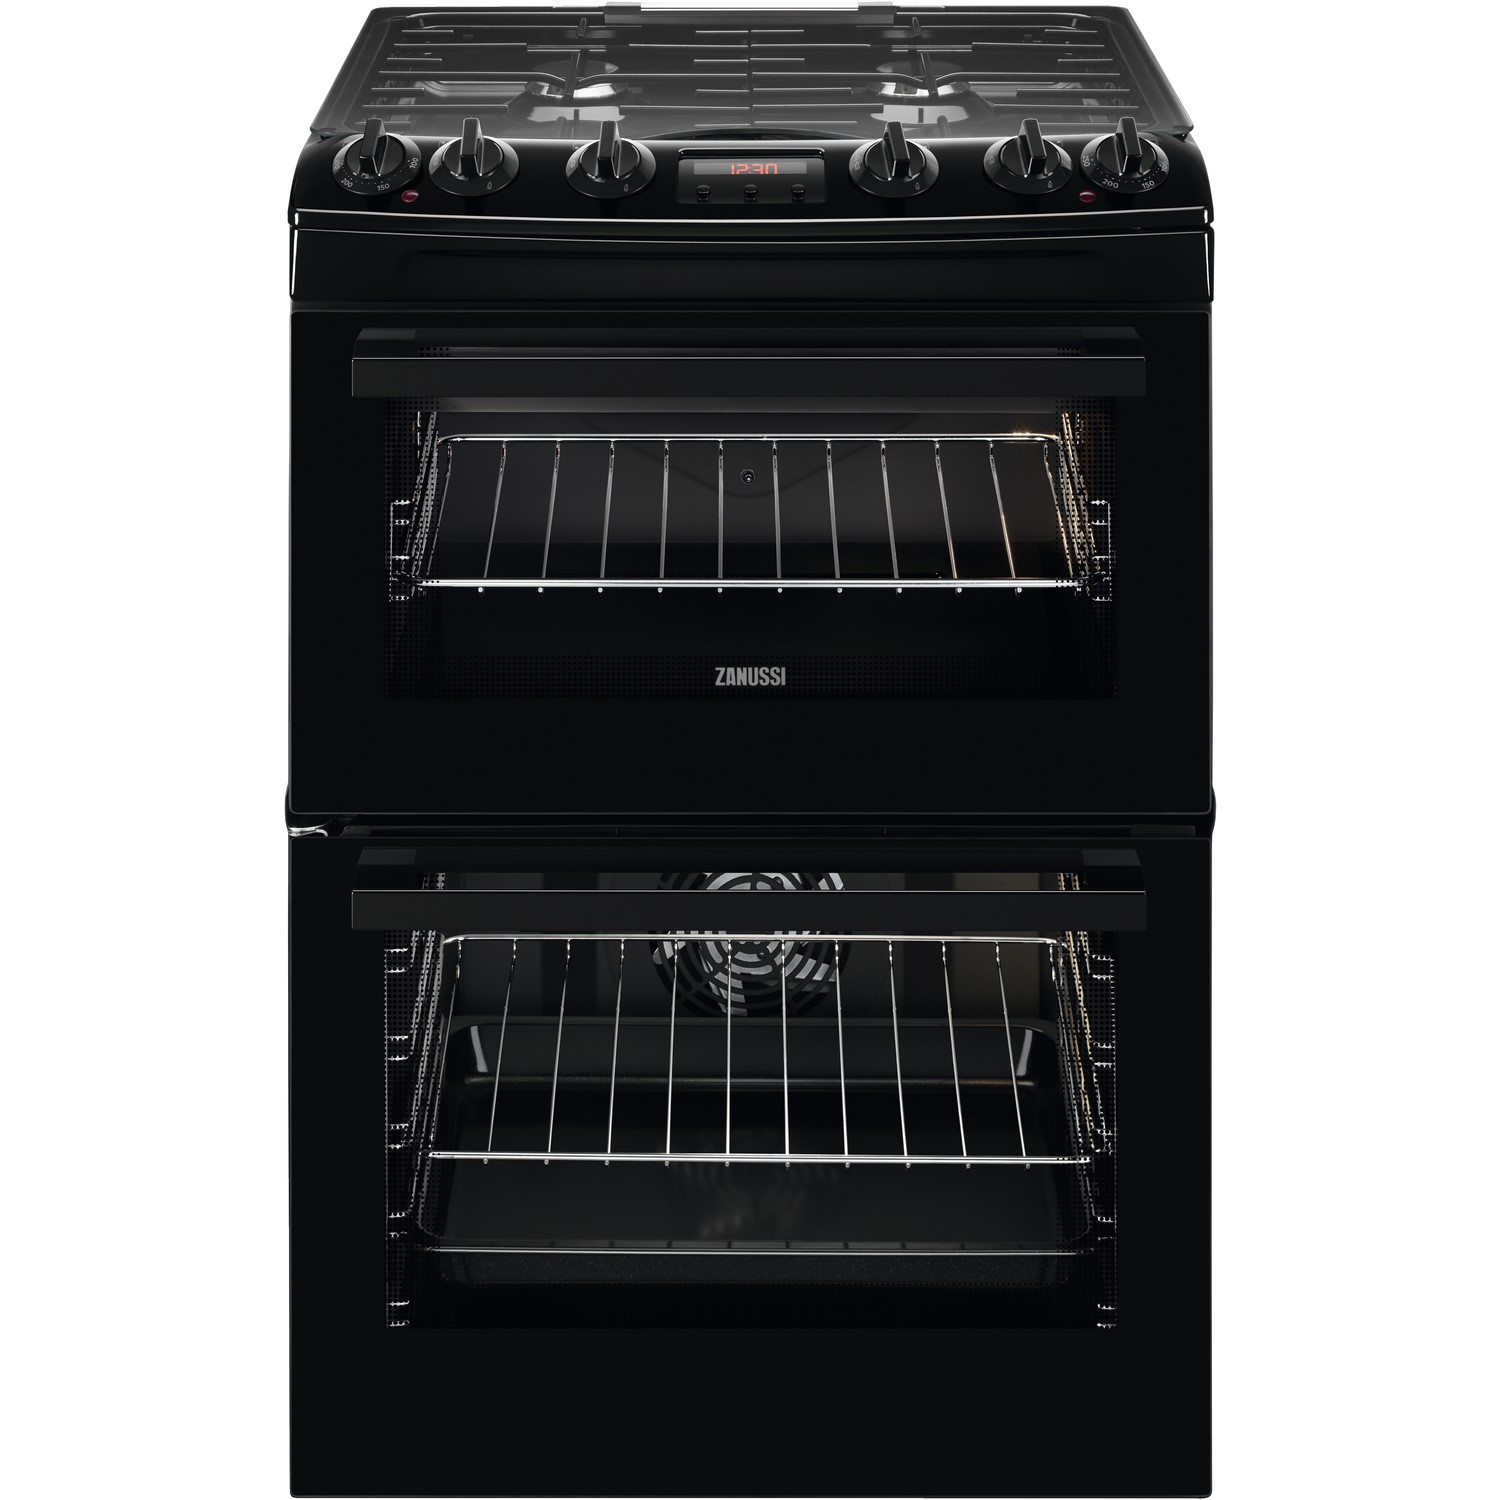 Refurbished Zanussi ZCK66350BA 60cm Double Oven Dual Fuel Cooker with Lid Black